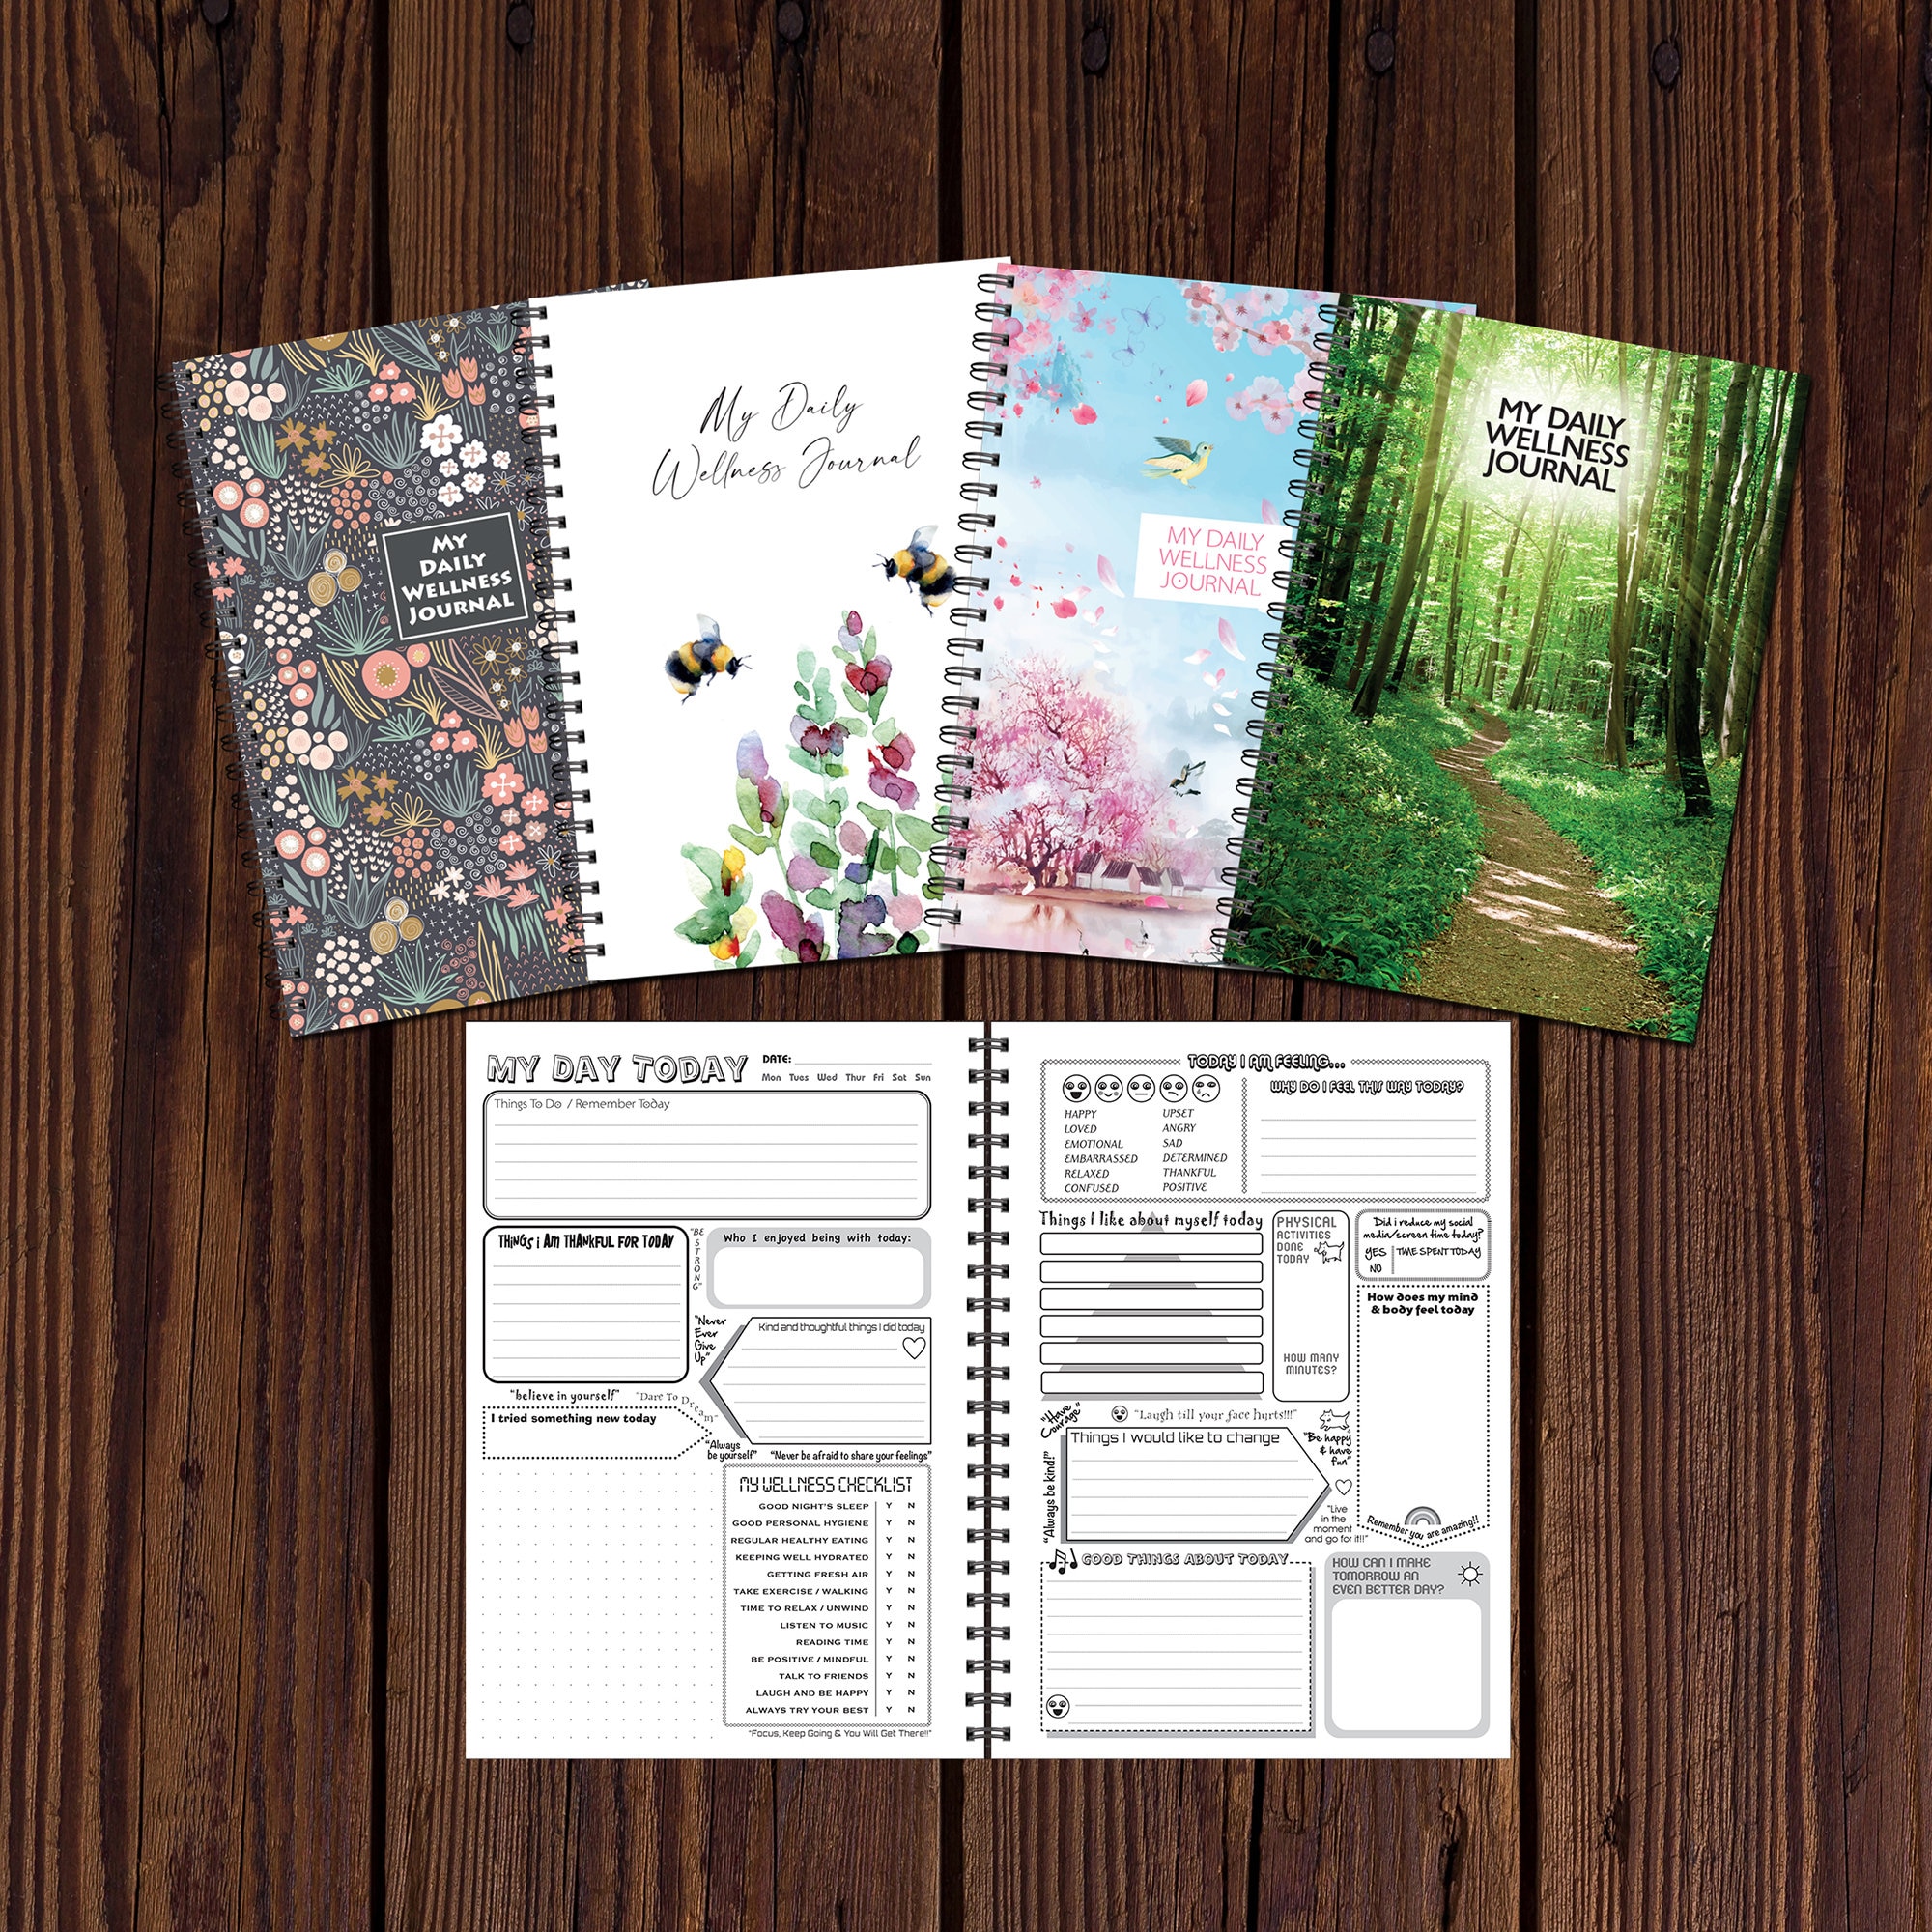 UK Bullet Journal Supplies - the Most Awesome Ones! - Slightly Sorted